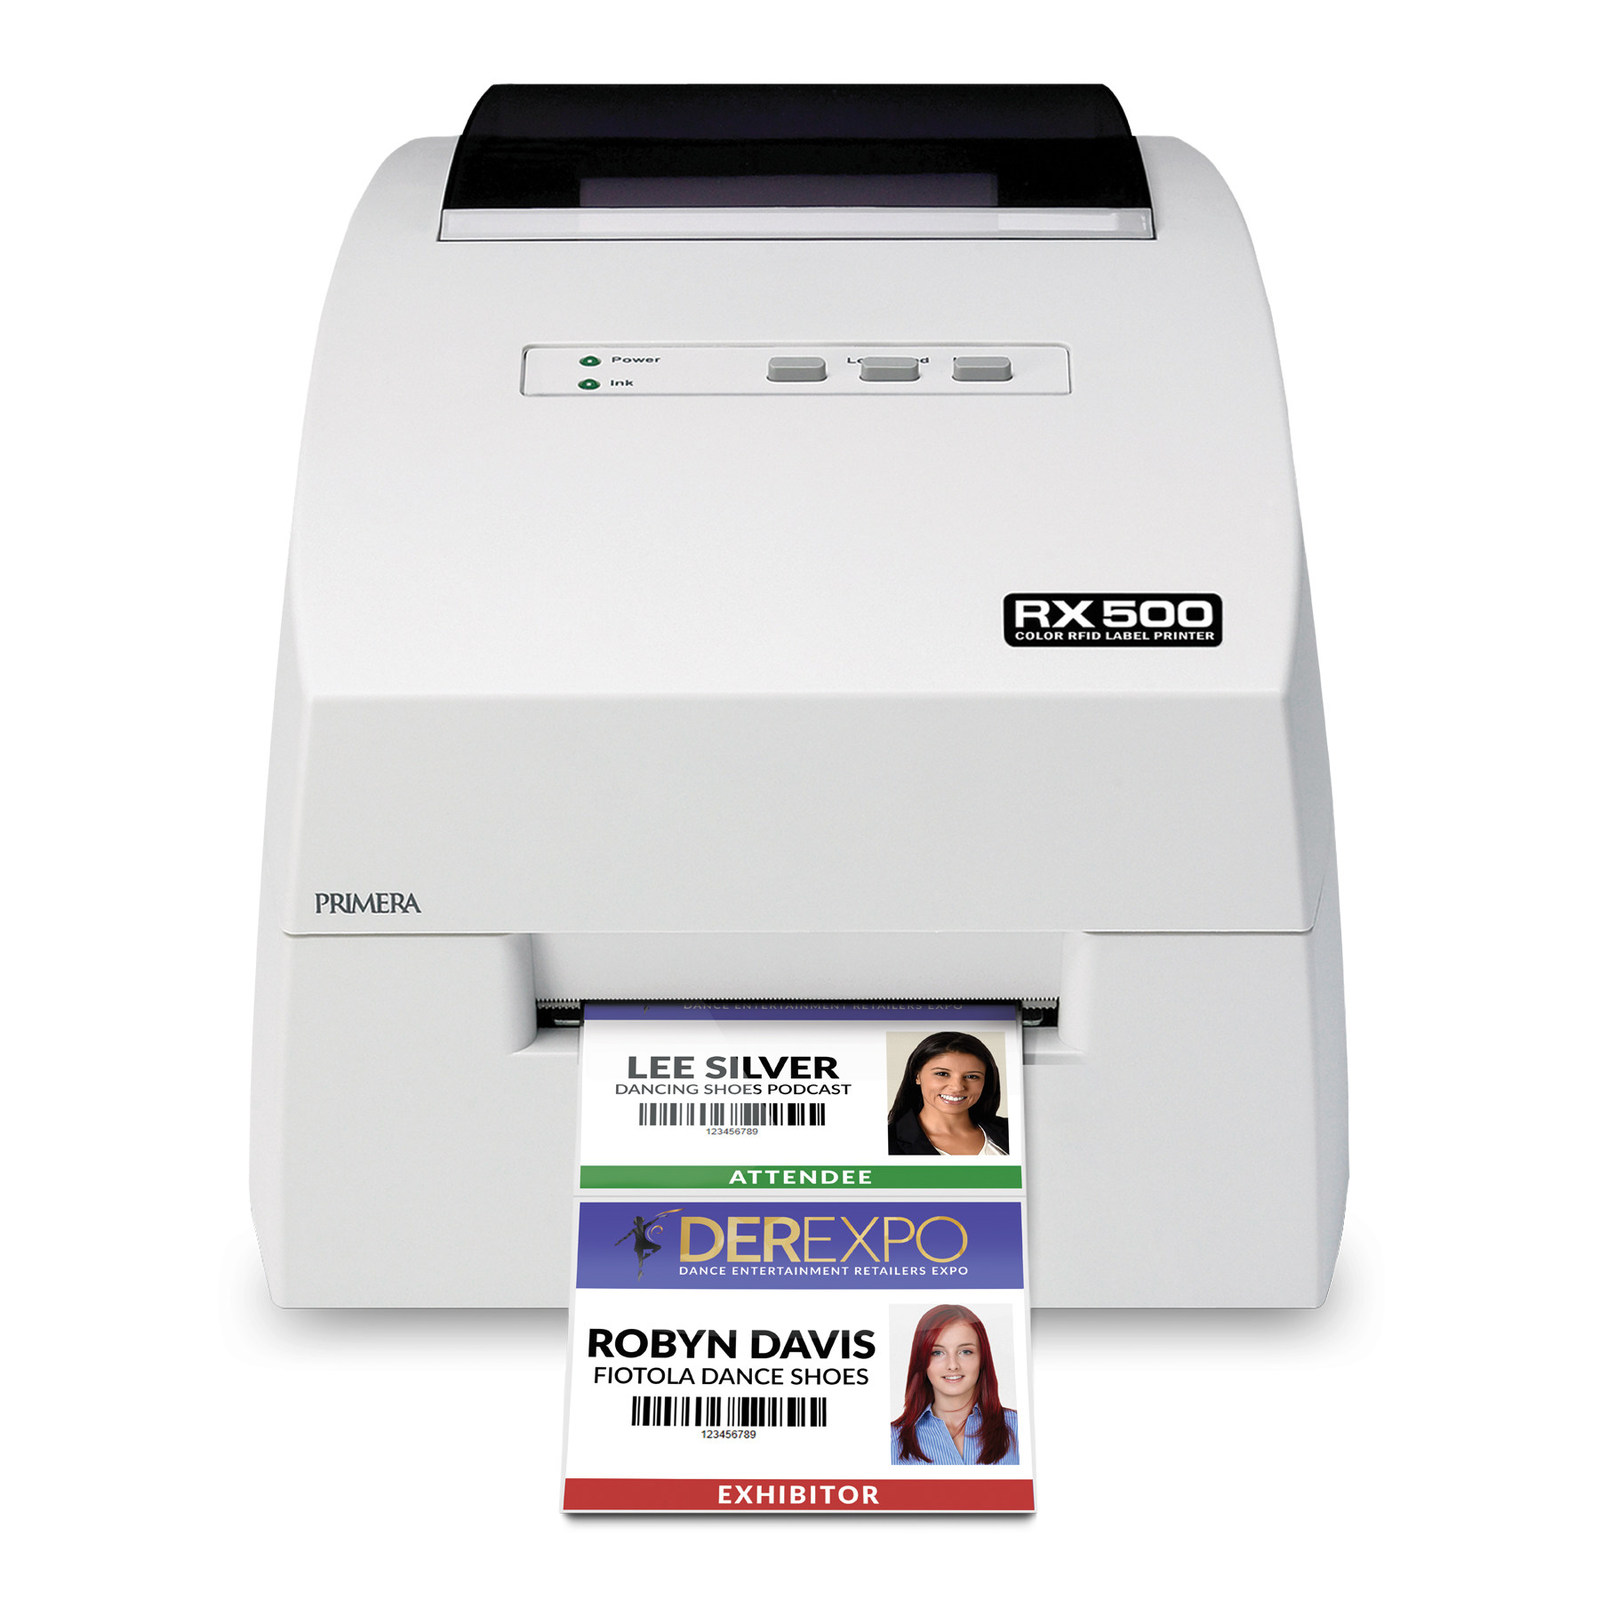 Dtm Offers Primera Rfid Label Printer In Emea Labels And Labeling 4451